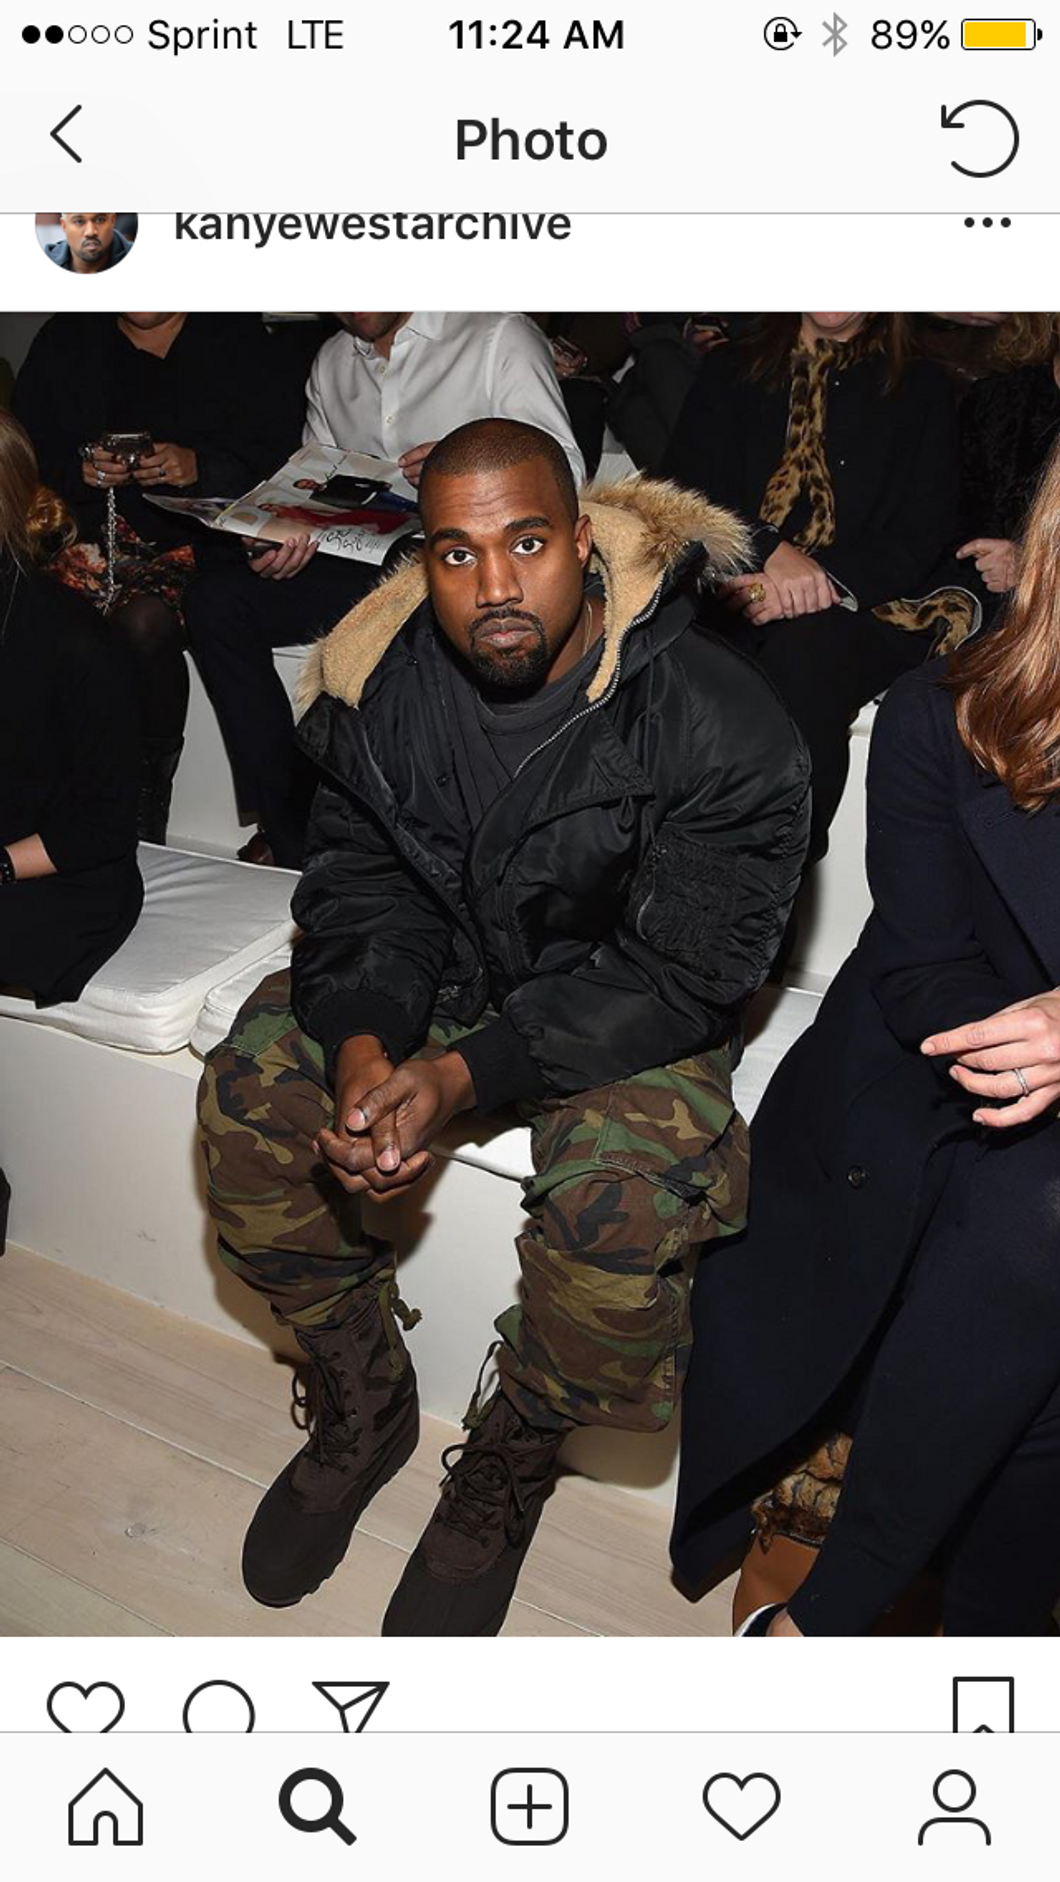 Kanye Finally Reaches His Equilibrium With "ye"